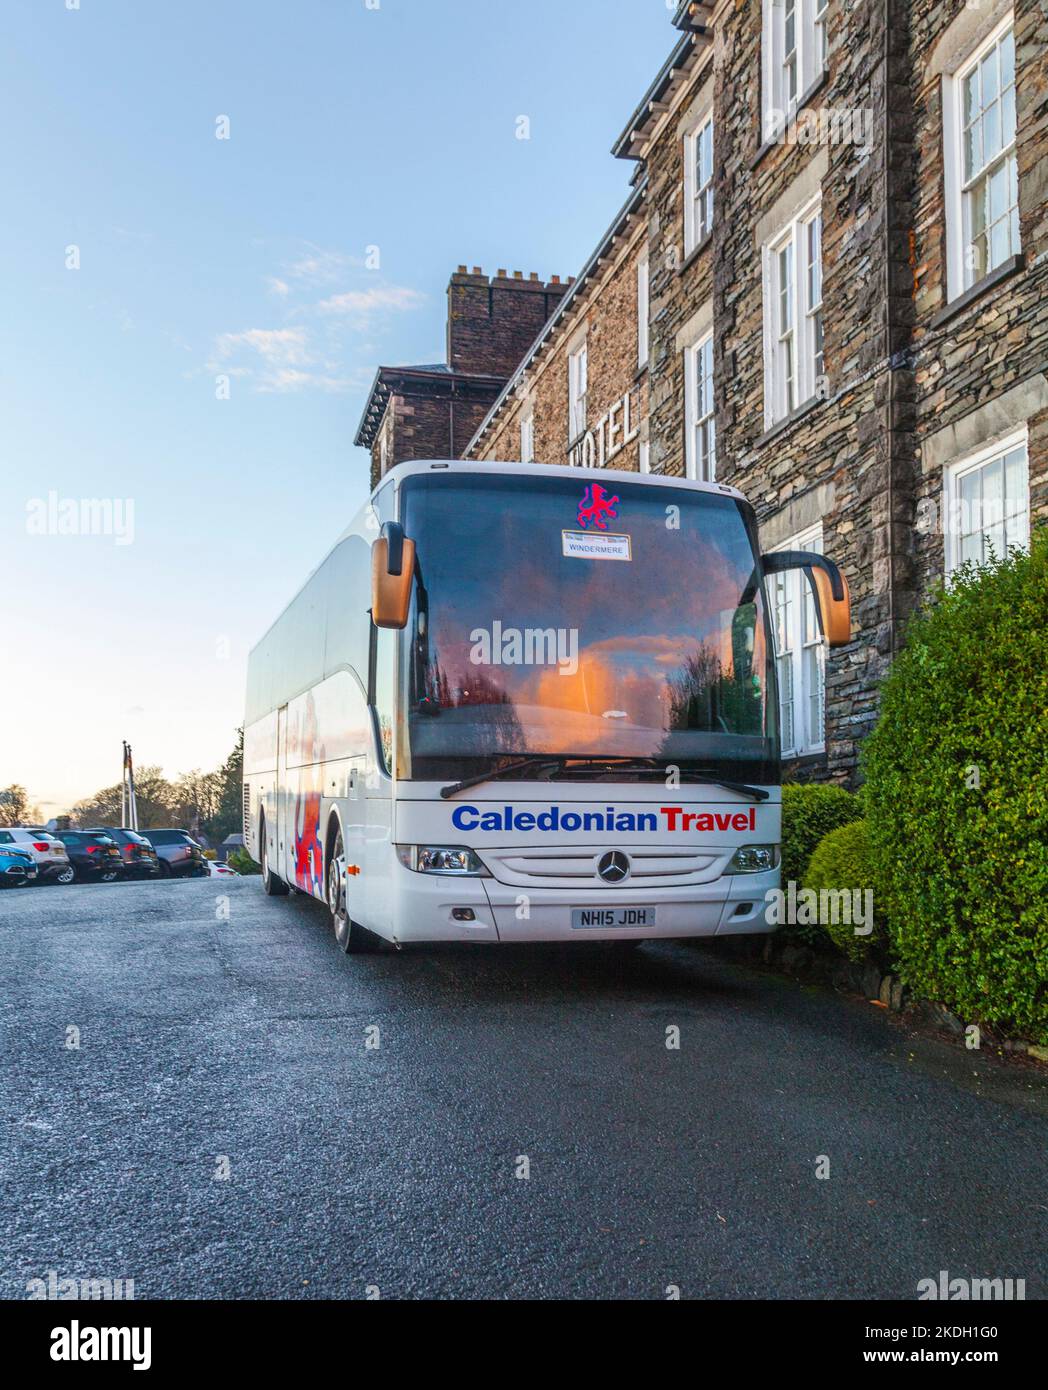 A Caledonian Travel coach outside the Windermere Hotel in the Lake District, England,UK Stock Photo